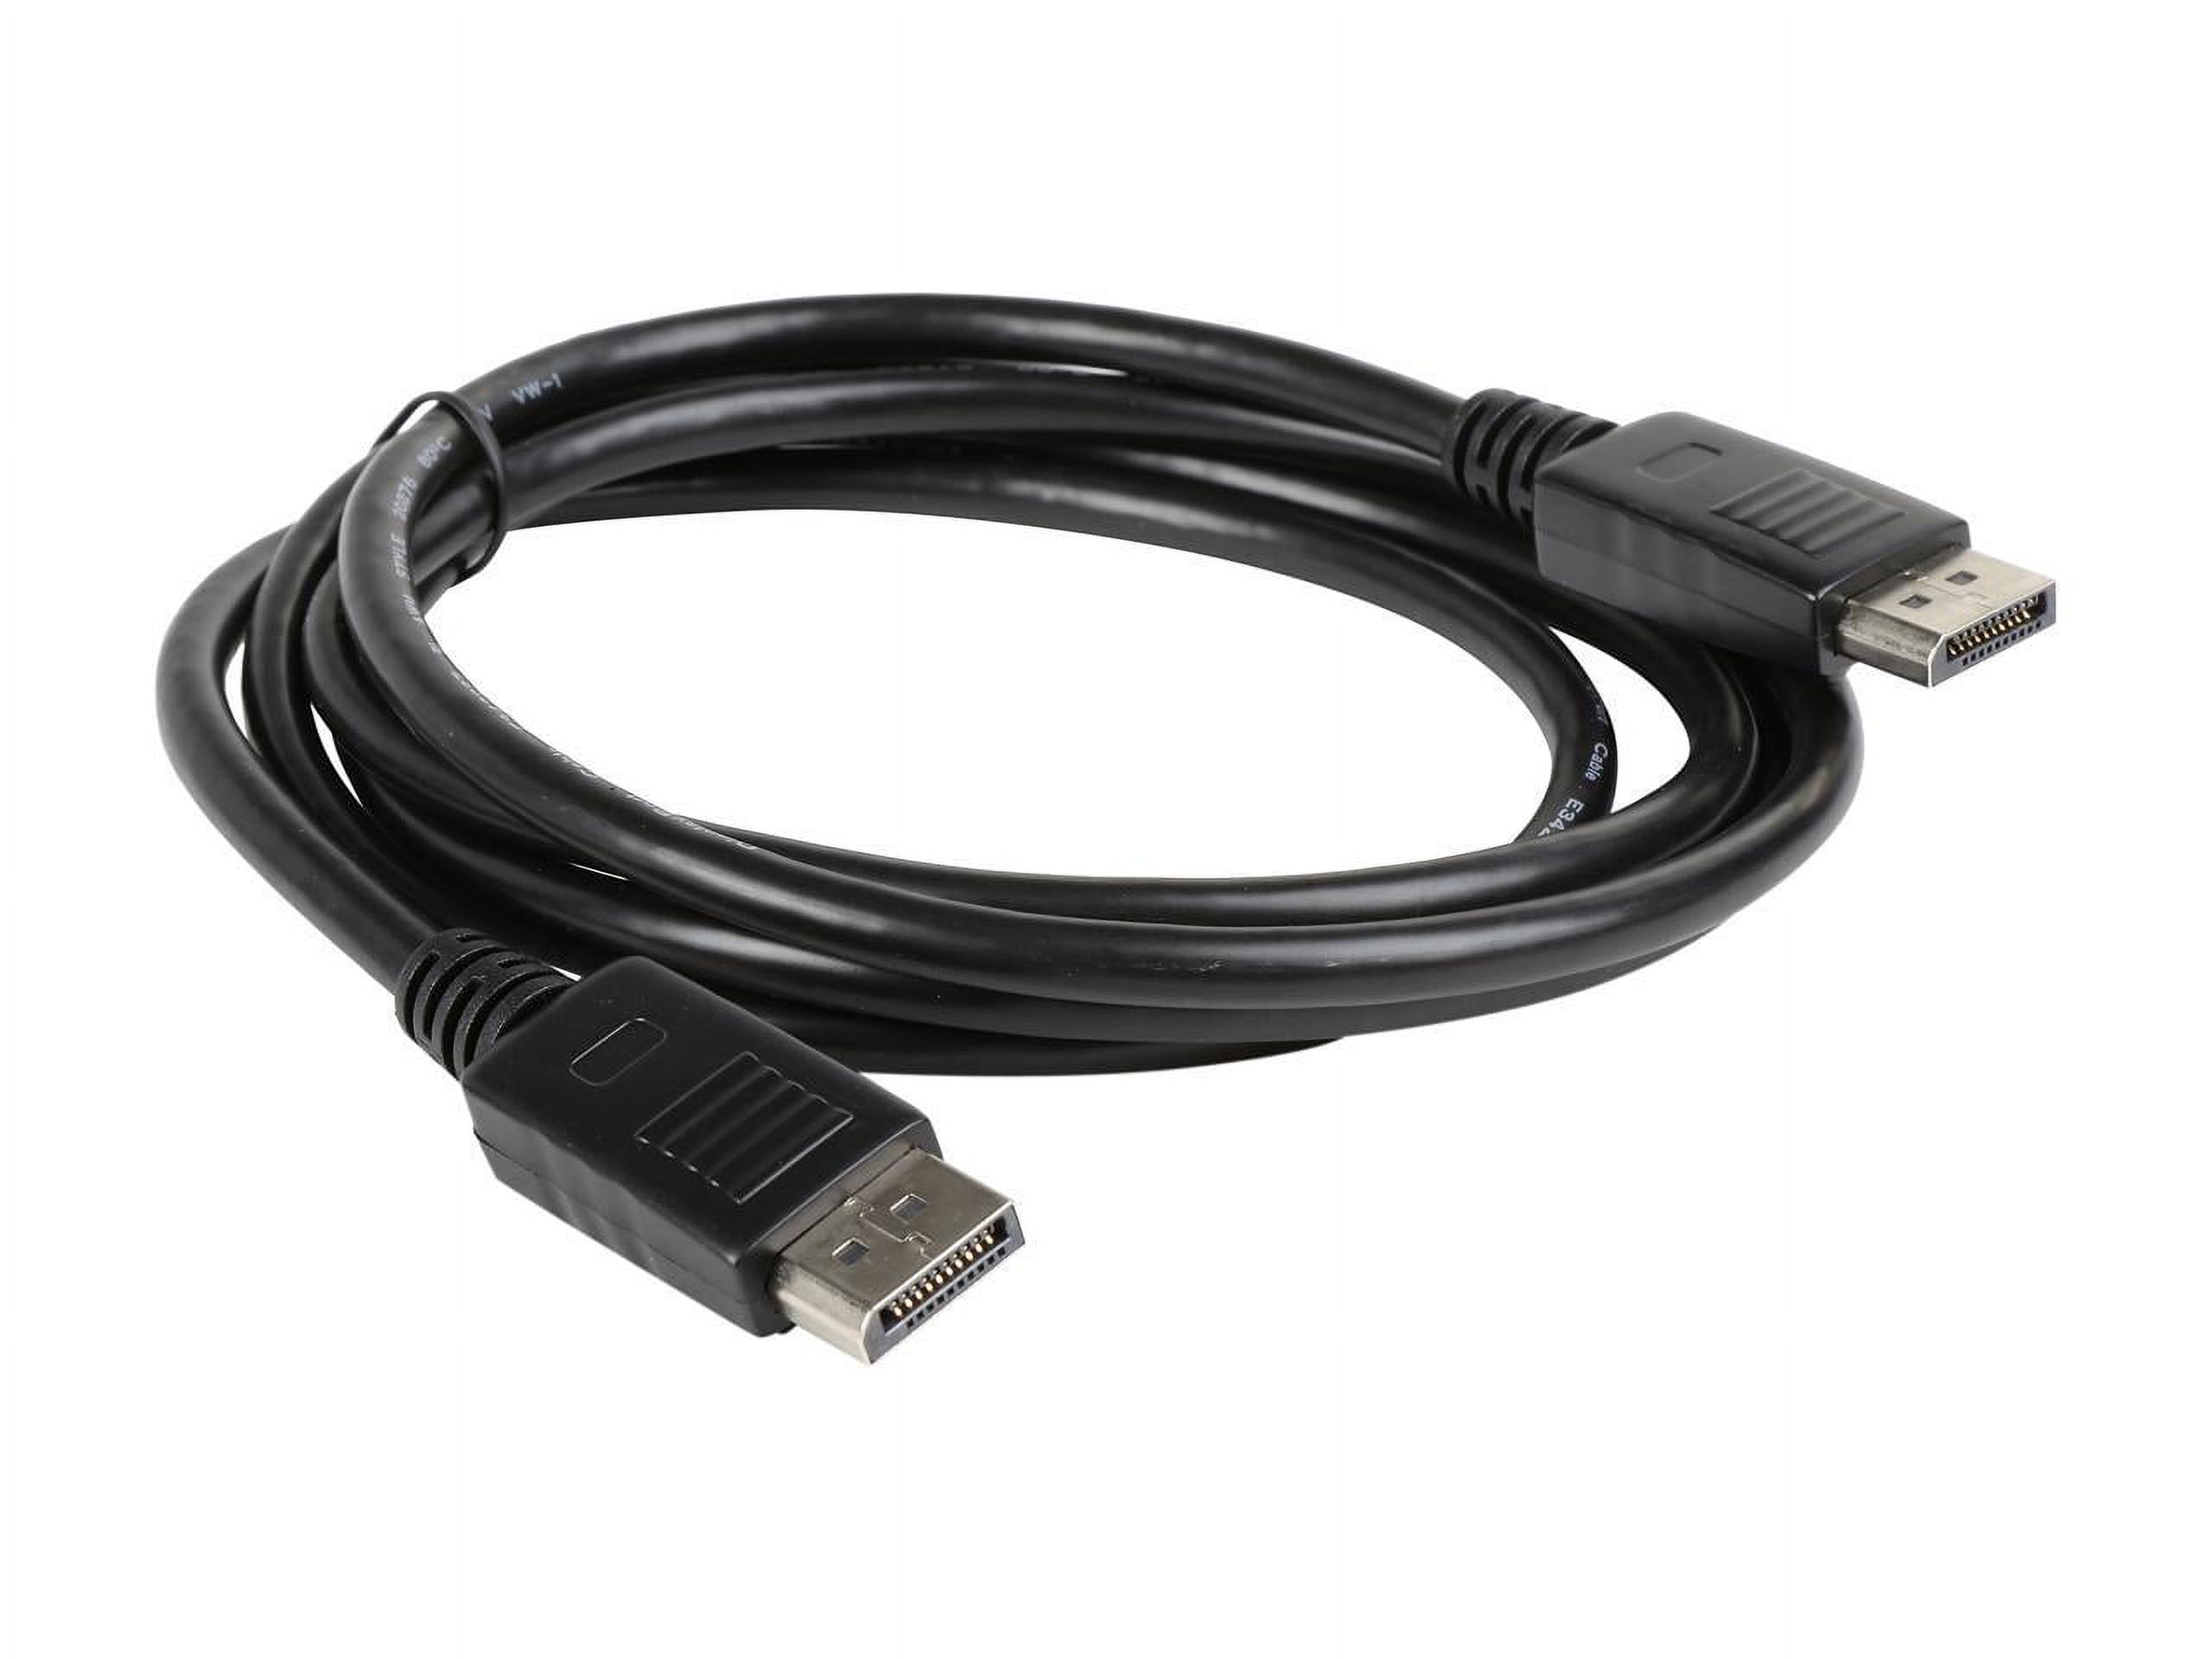 Tripp Lite DisplayPort Cable with Latches (M/M), DP, 4K x 2K, 6-ft. (P580-006) - image 2 of 3